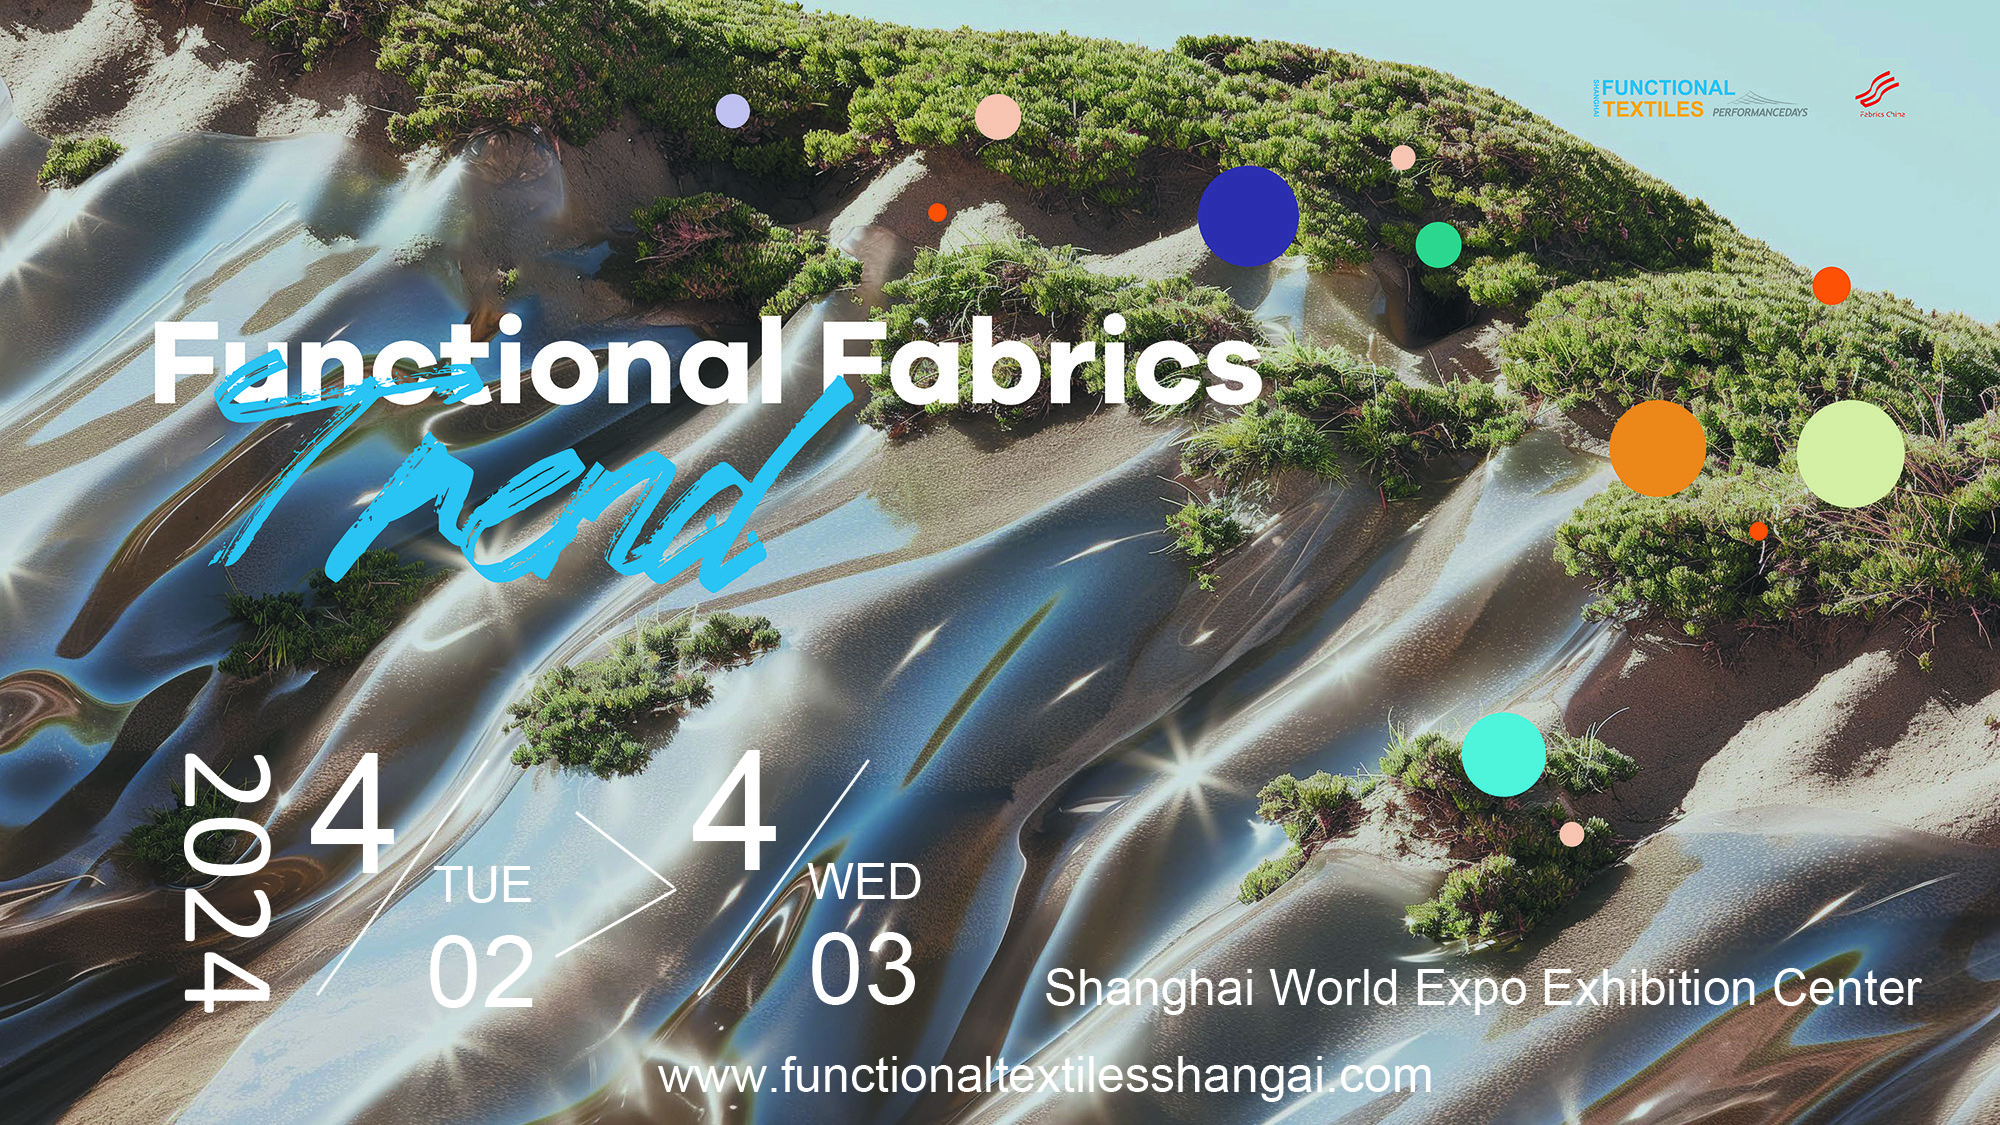 Functional Fabric Trend published by Functional Textiles Shanghai